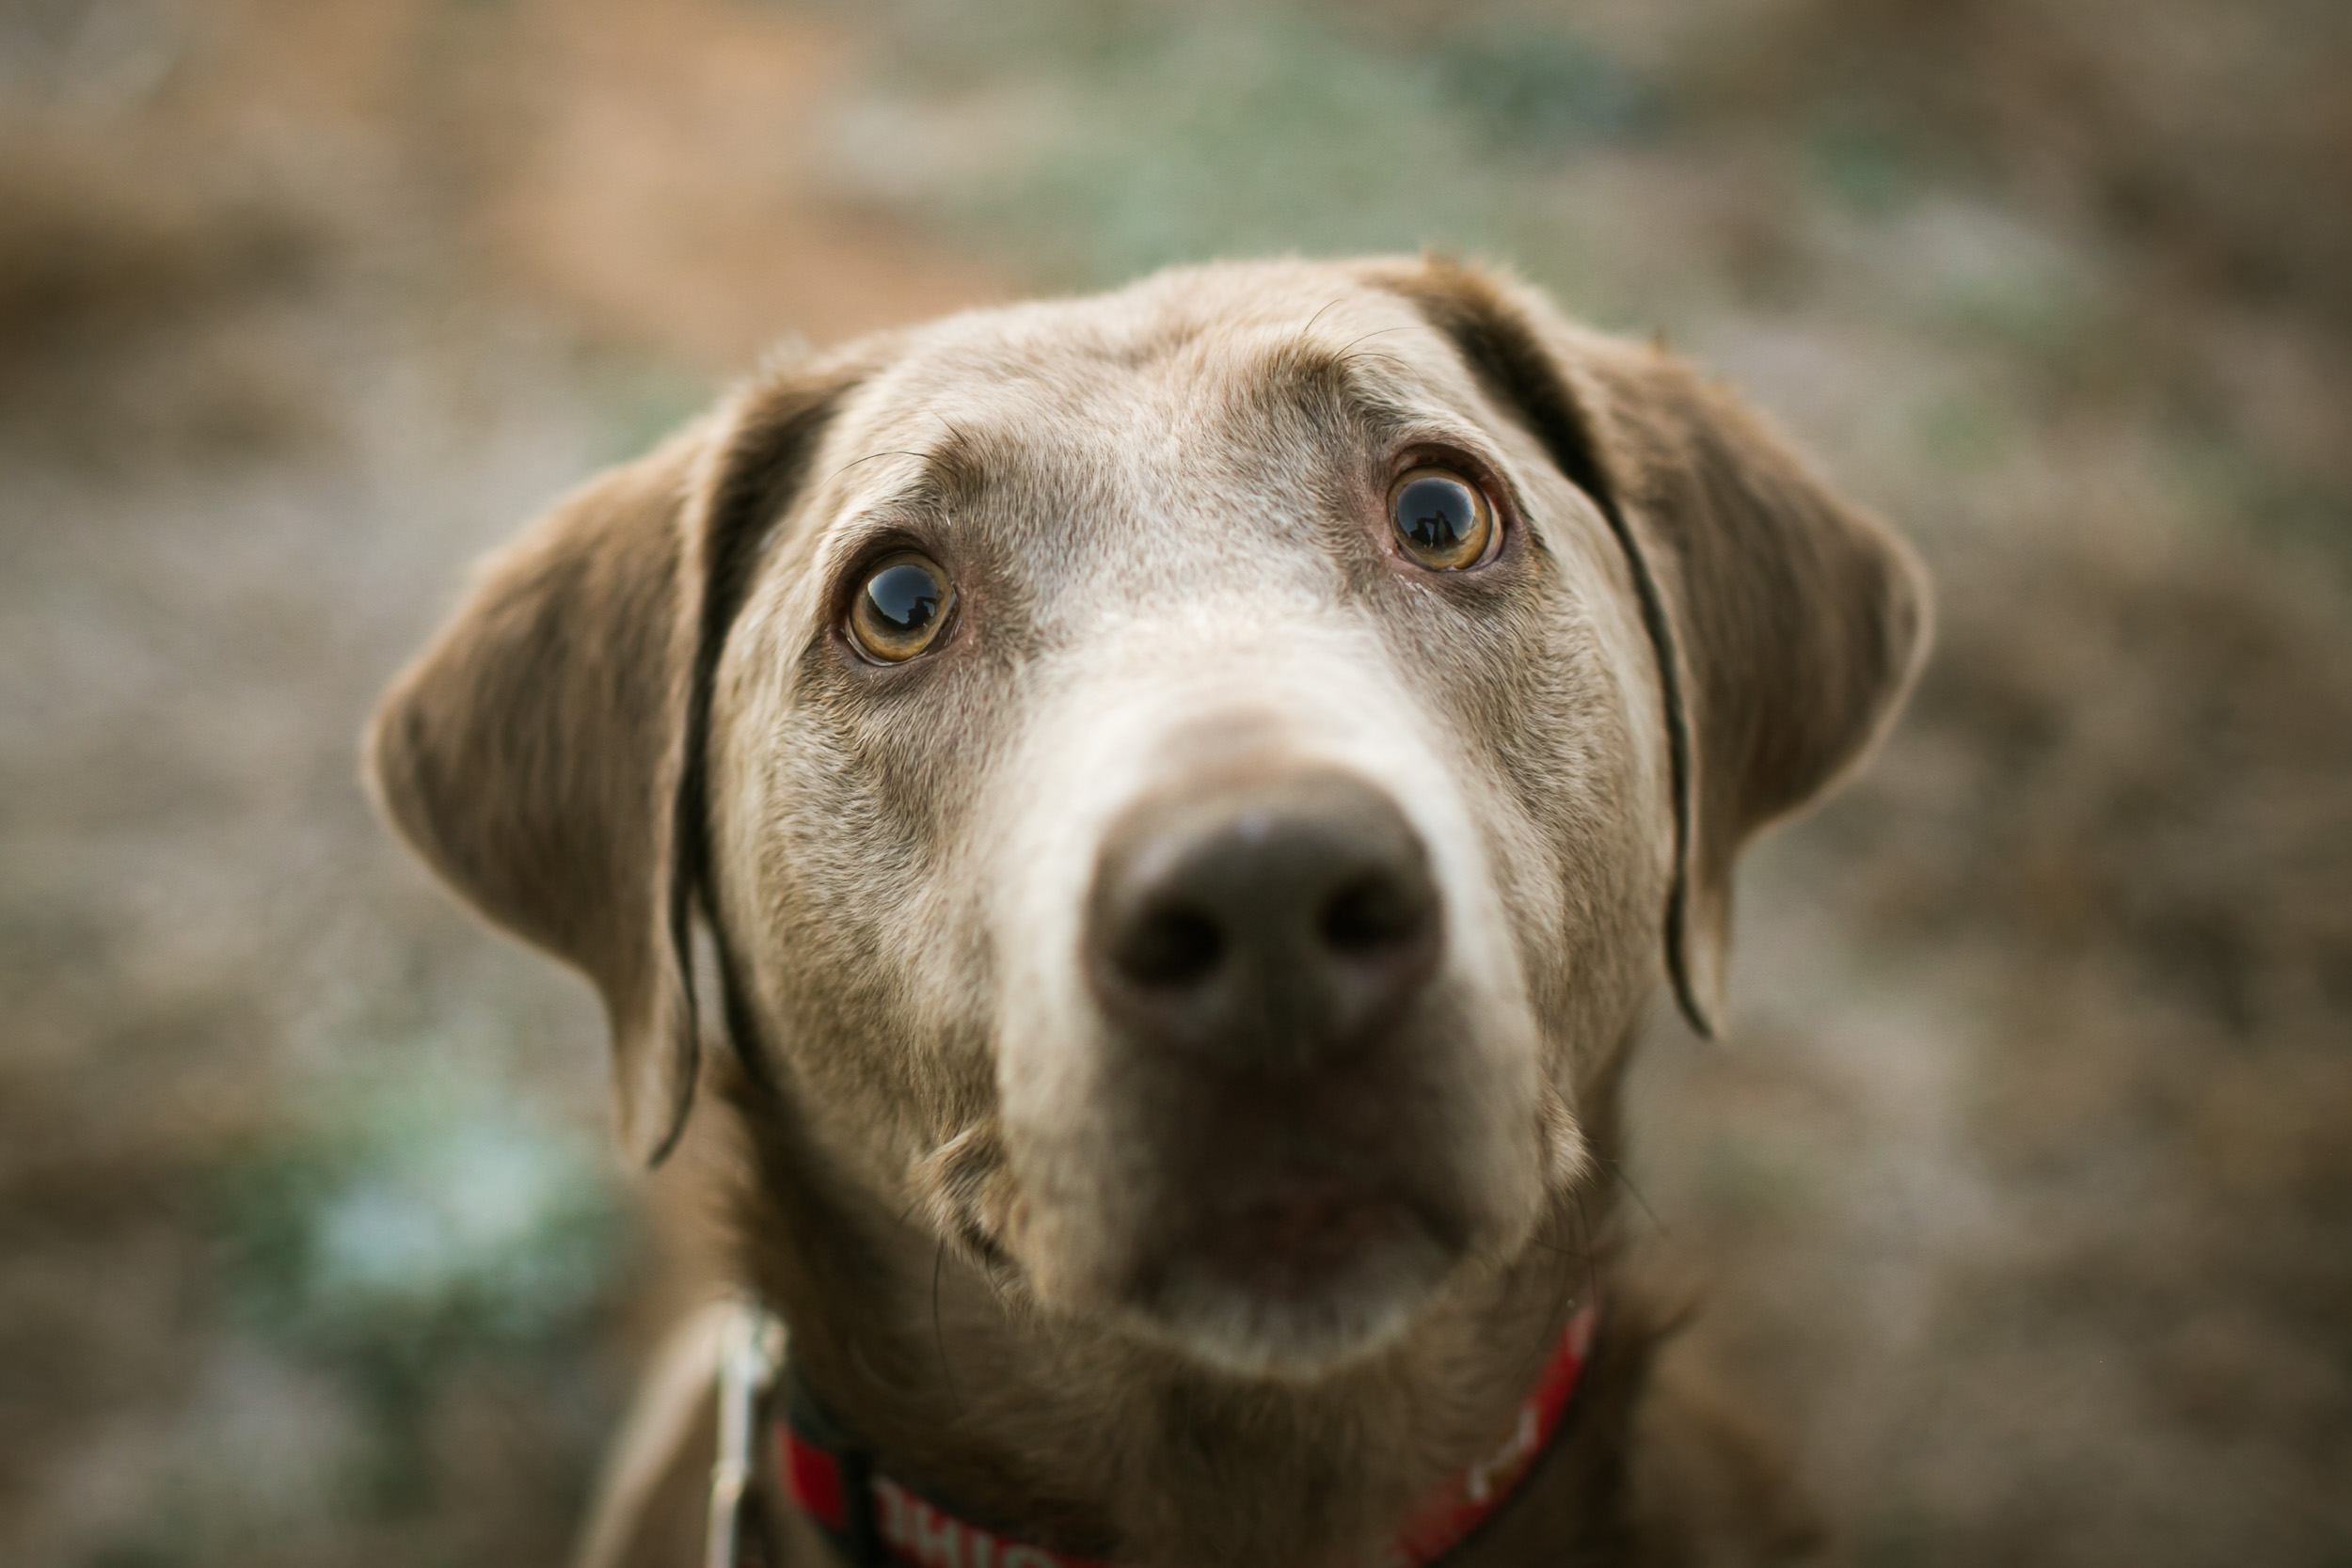 Durham Family Photographer | G. Lin Photography | Close up portrait of dog looking at camera